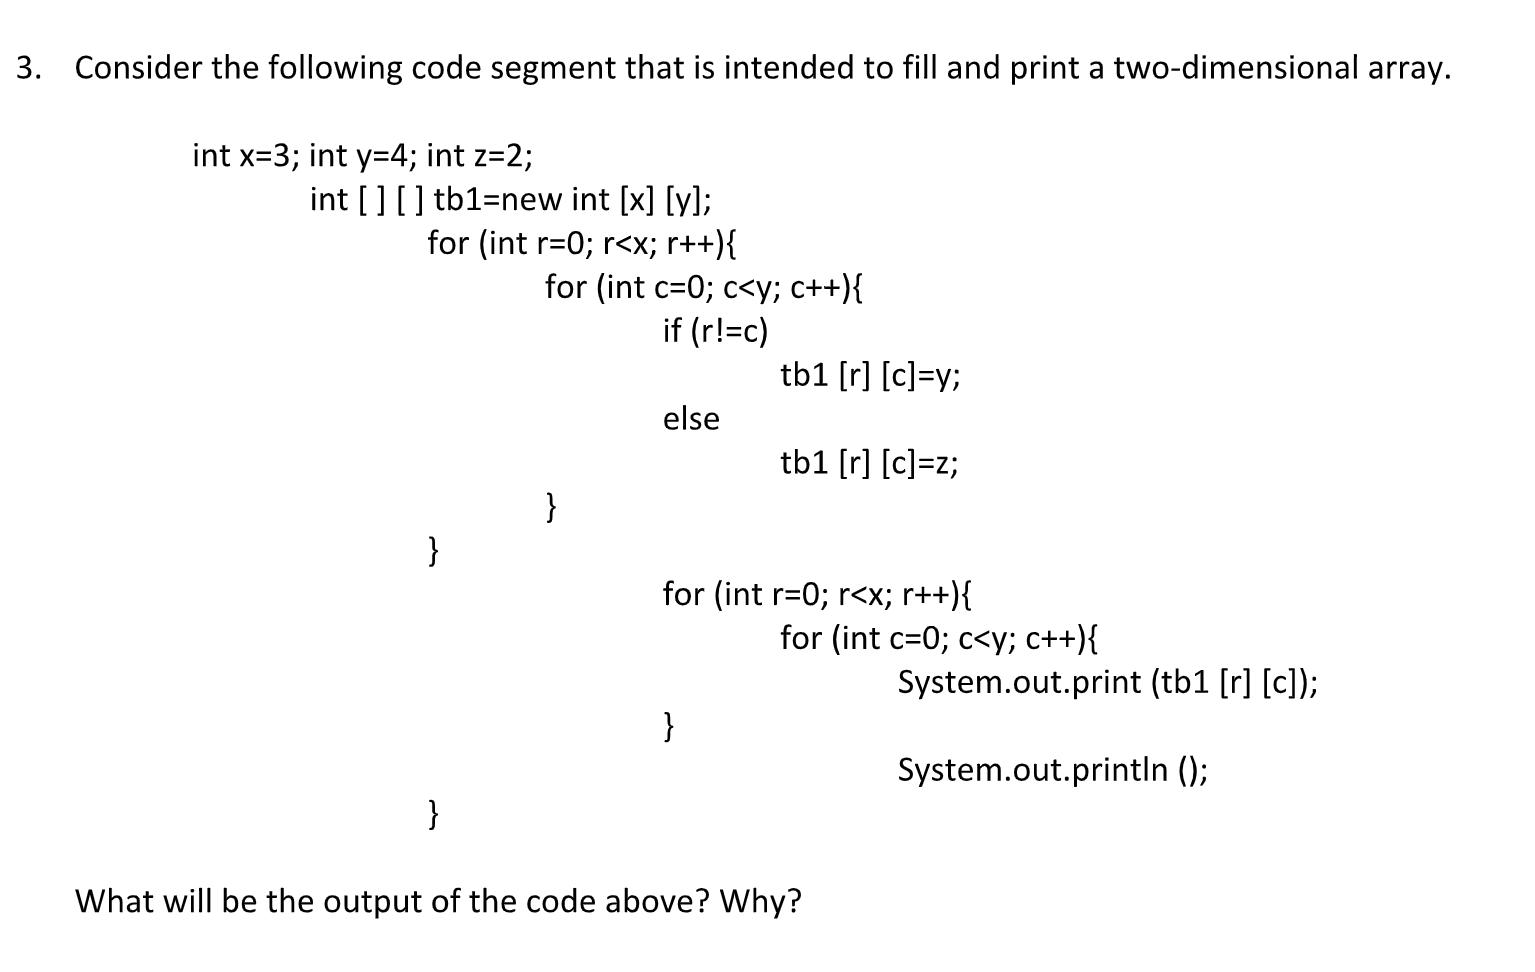 3. Consider the following code segment that is intended to fill and print a two-dimensional array. int x=3;